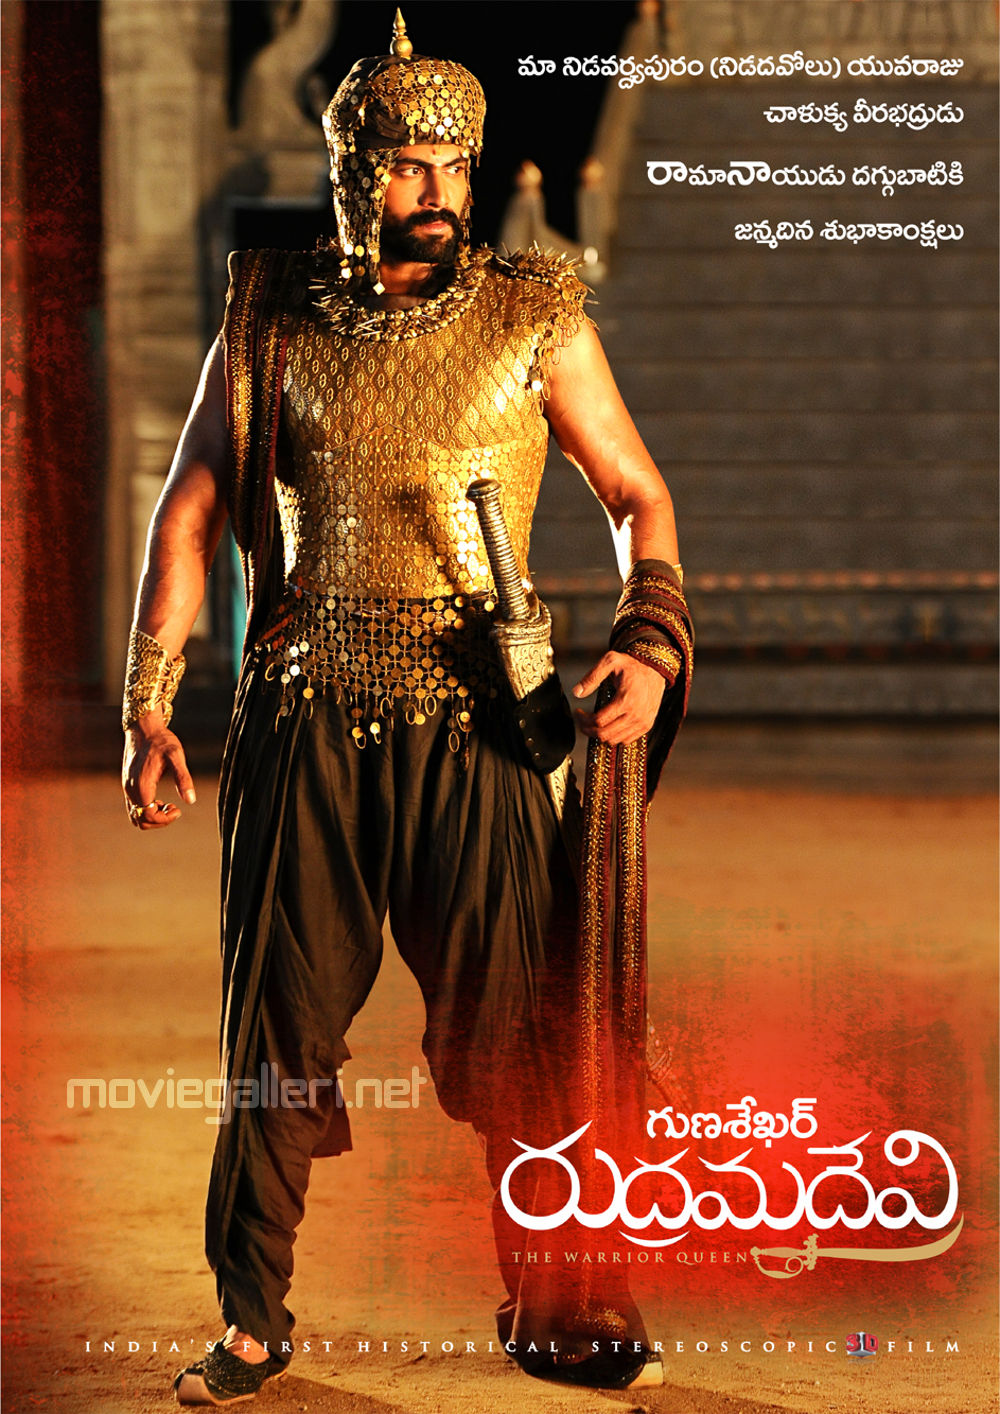 Anushka-Starrer Rudramadevi Trailer is Out | Silverscreen India